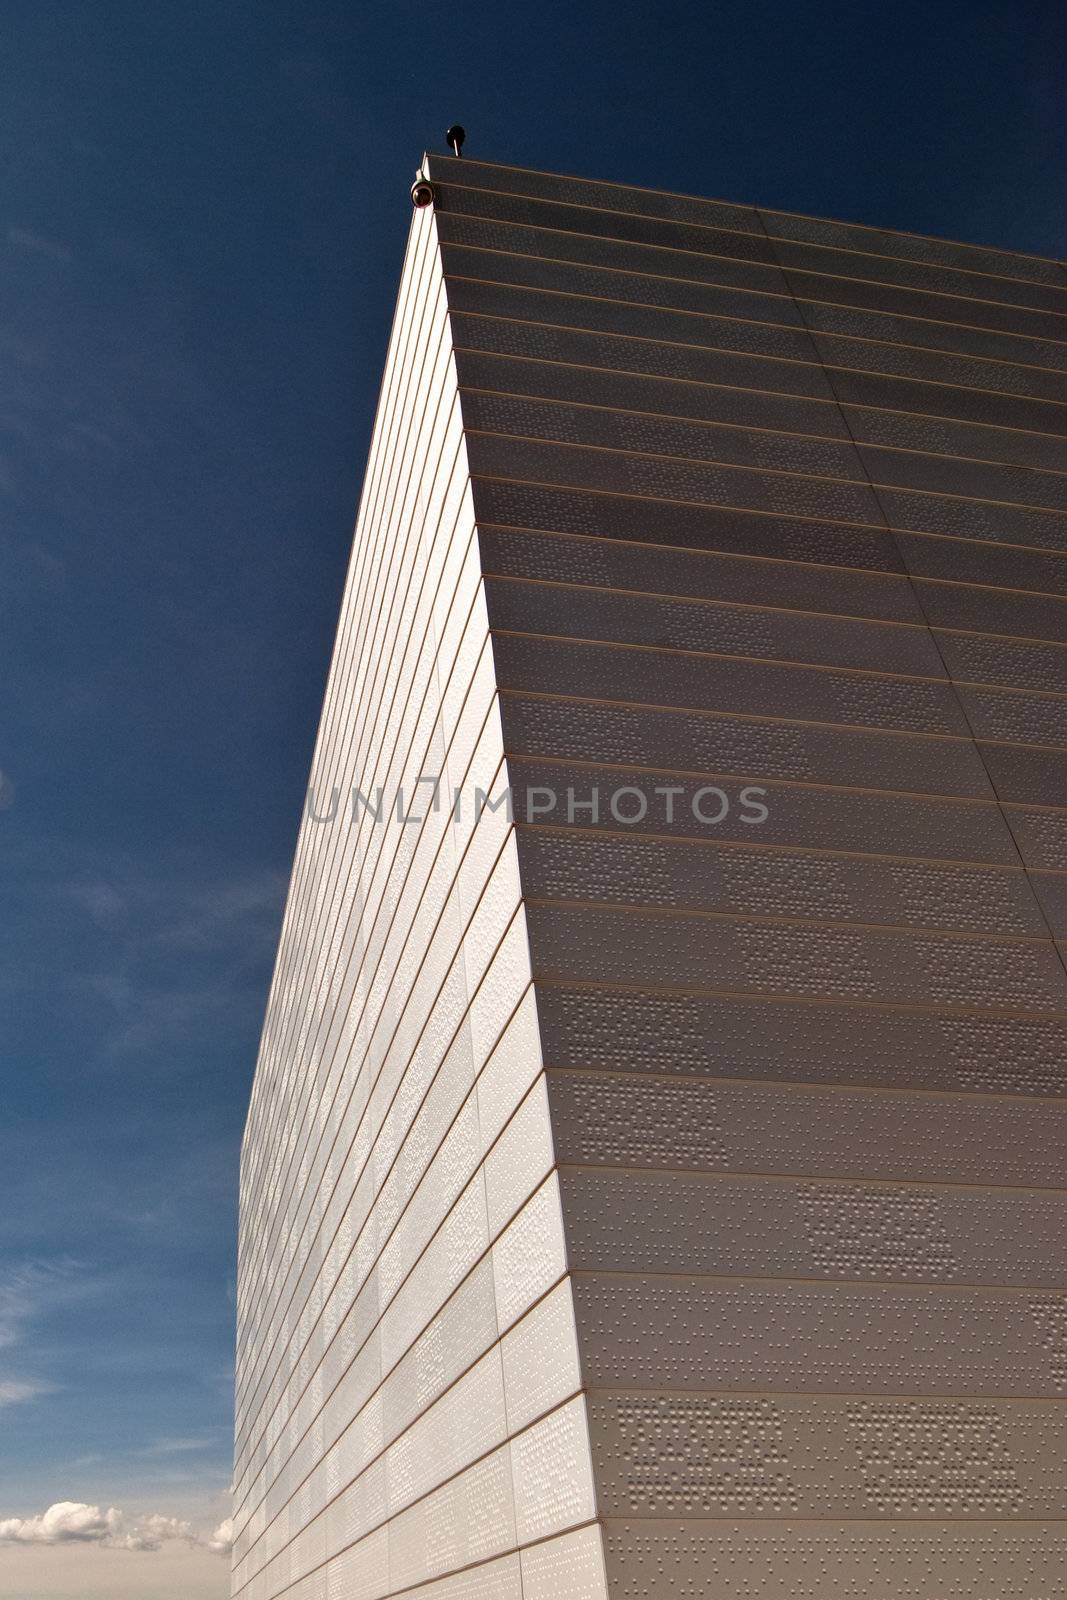 Architecture Detail of the Opera House in Oslo, Norway